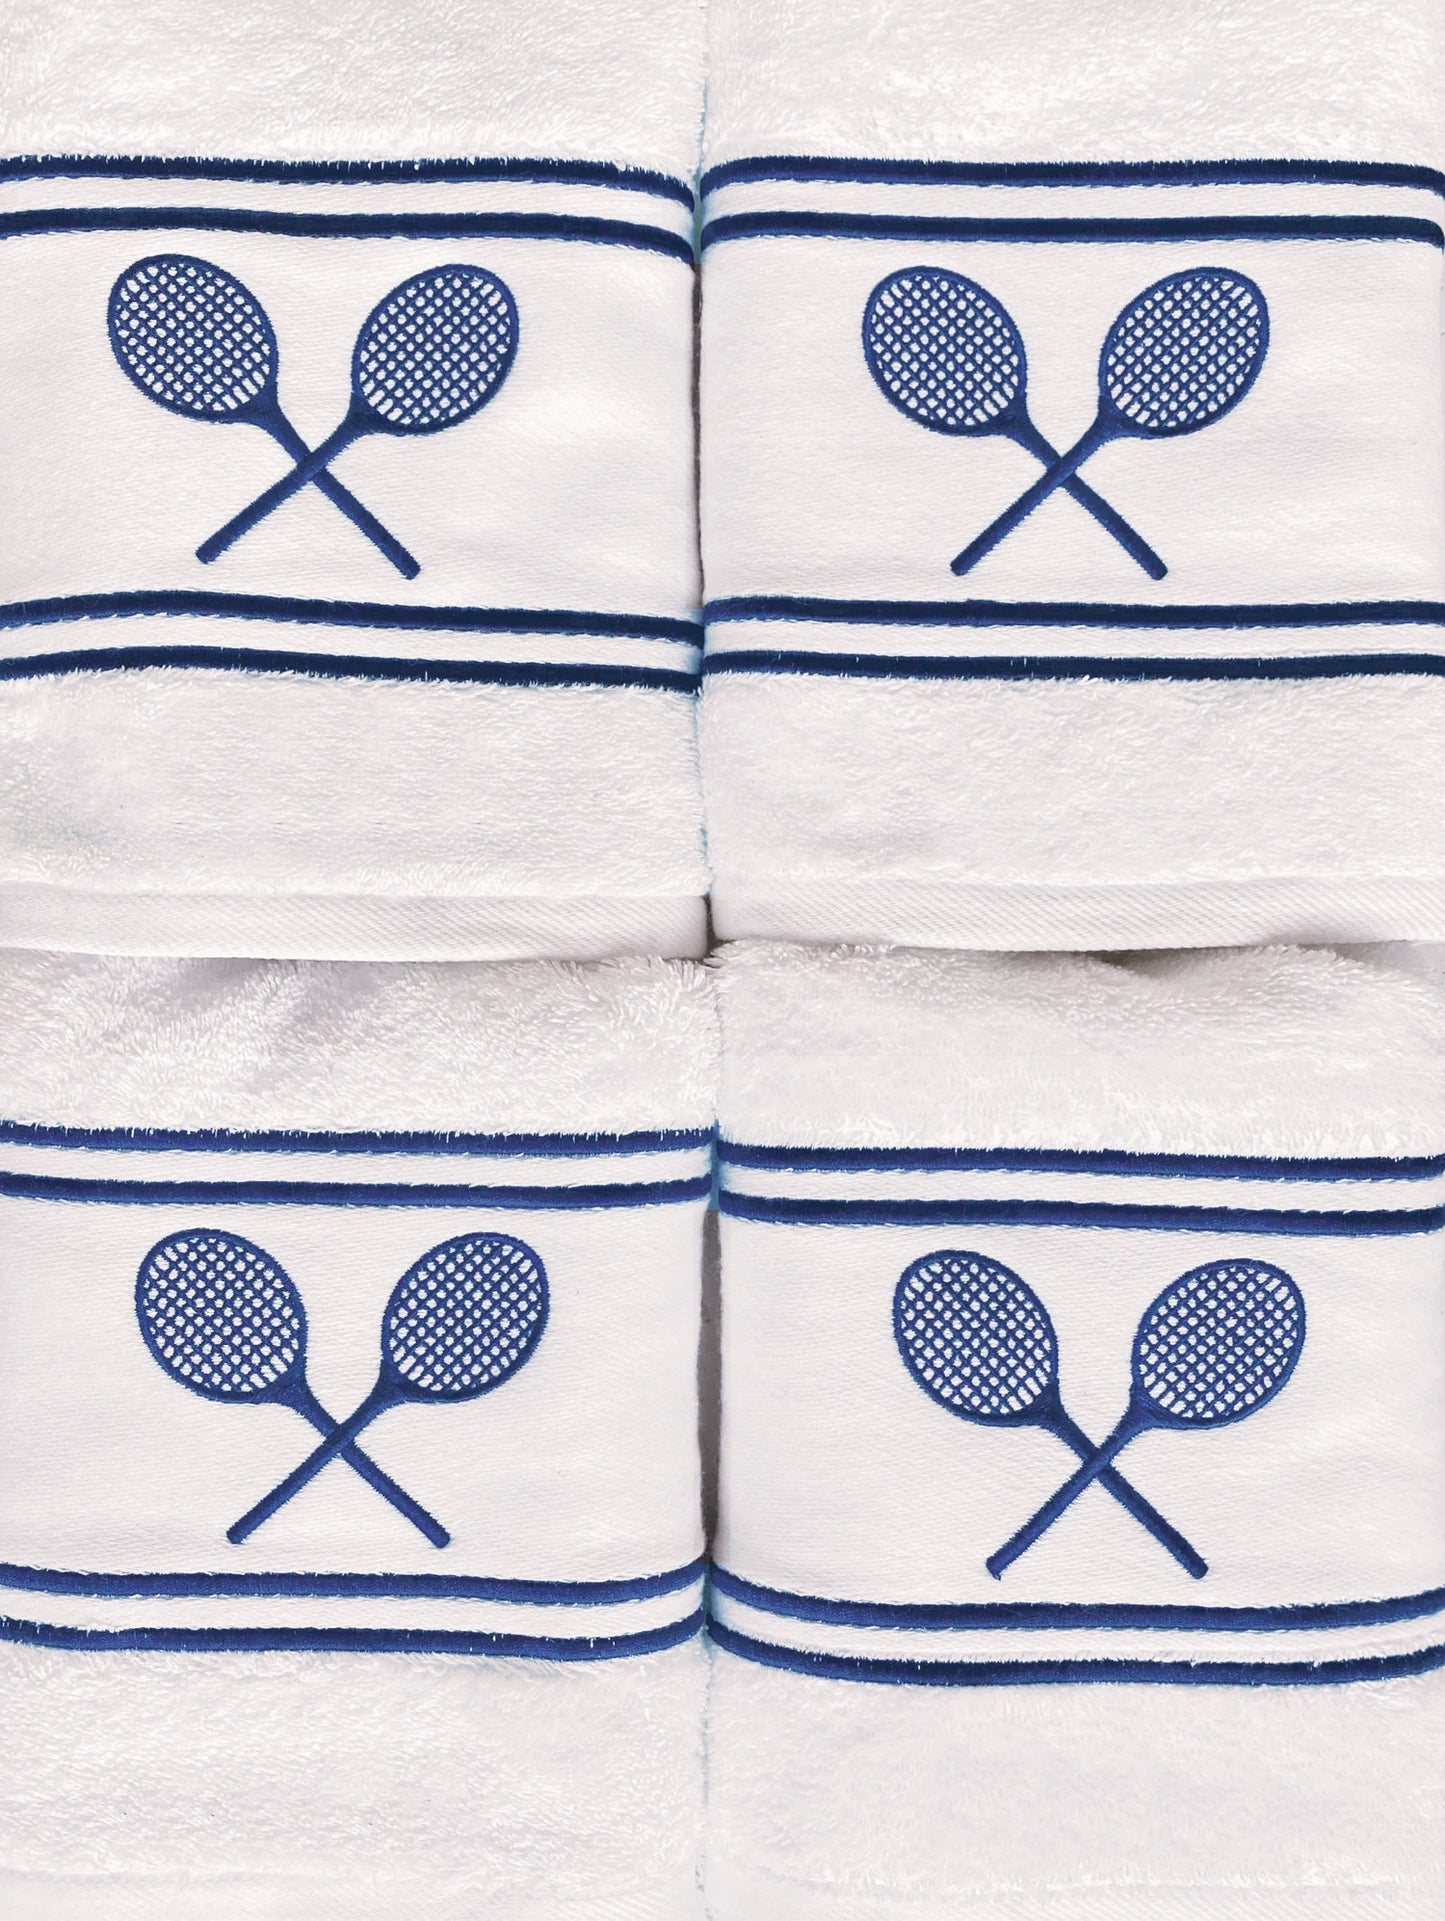 Matchtime Team Towel (Case of 8)